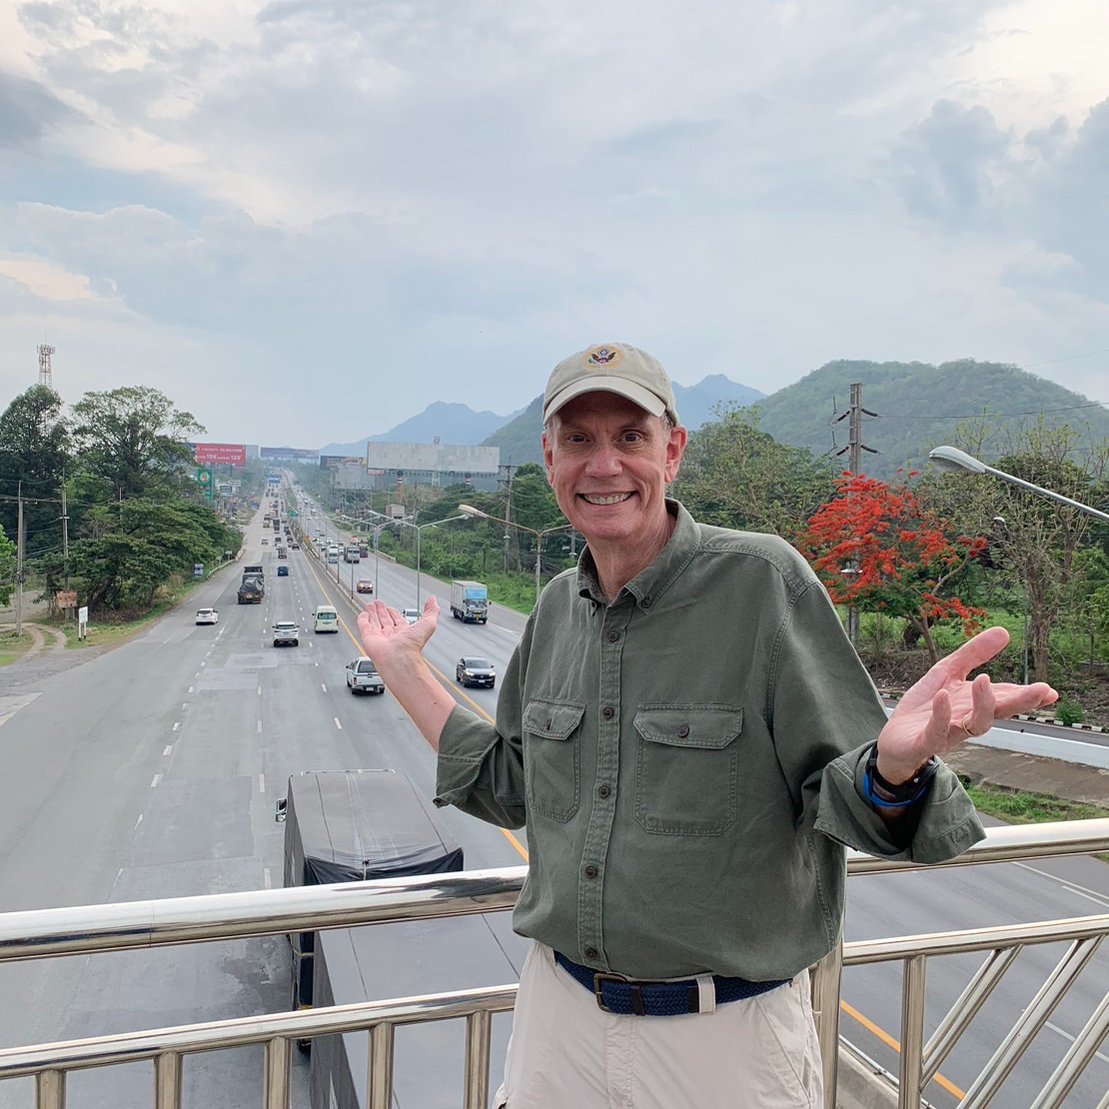 🇹🇭🇺🇸have done so much together over the years. Moving & memorable drive on Thailand's 1st international standard highway, built in 1957 as part of our enduring partnership. ถนนมิตรภาพ is 1 more beautiful thread in the amazing tapestry of ties between us. #190ThaiUS